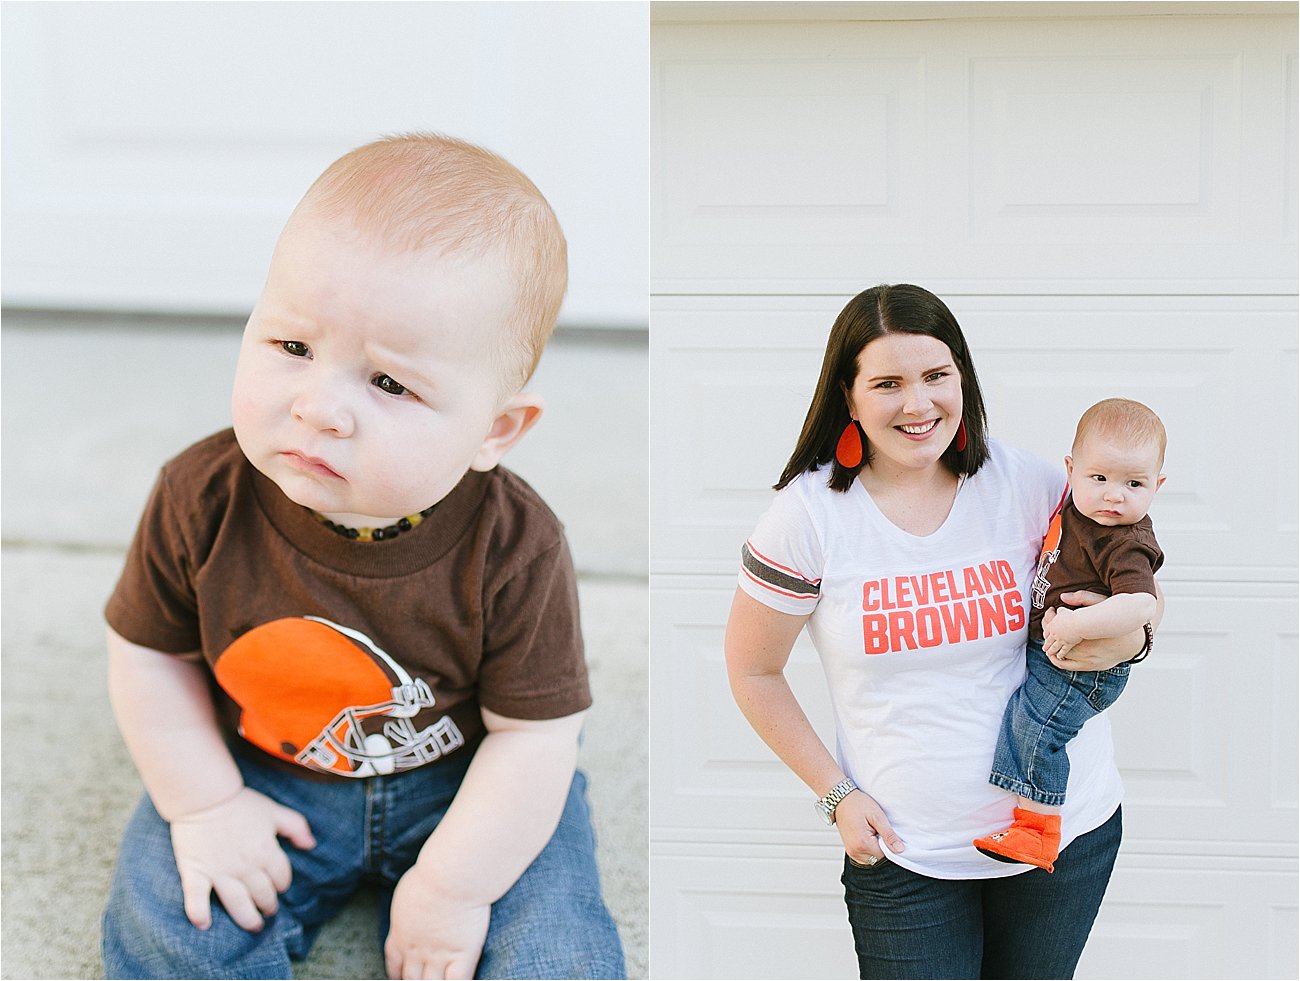 Cleveland Browns NFL Fan Style #NFLfanstyle #cg #ad (9)